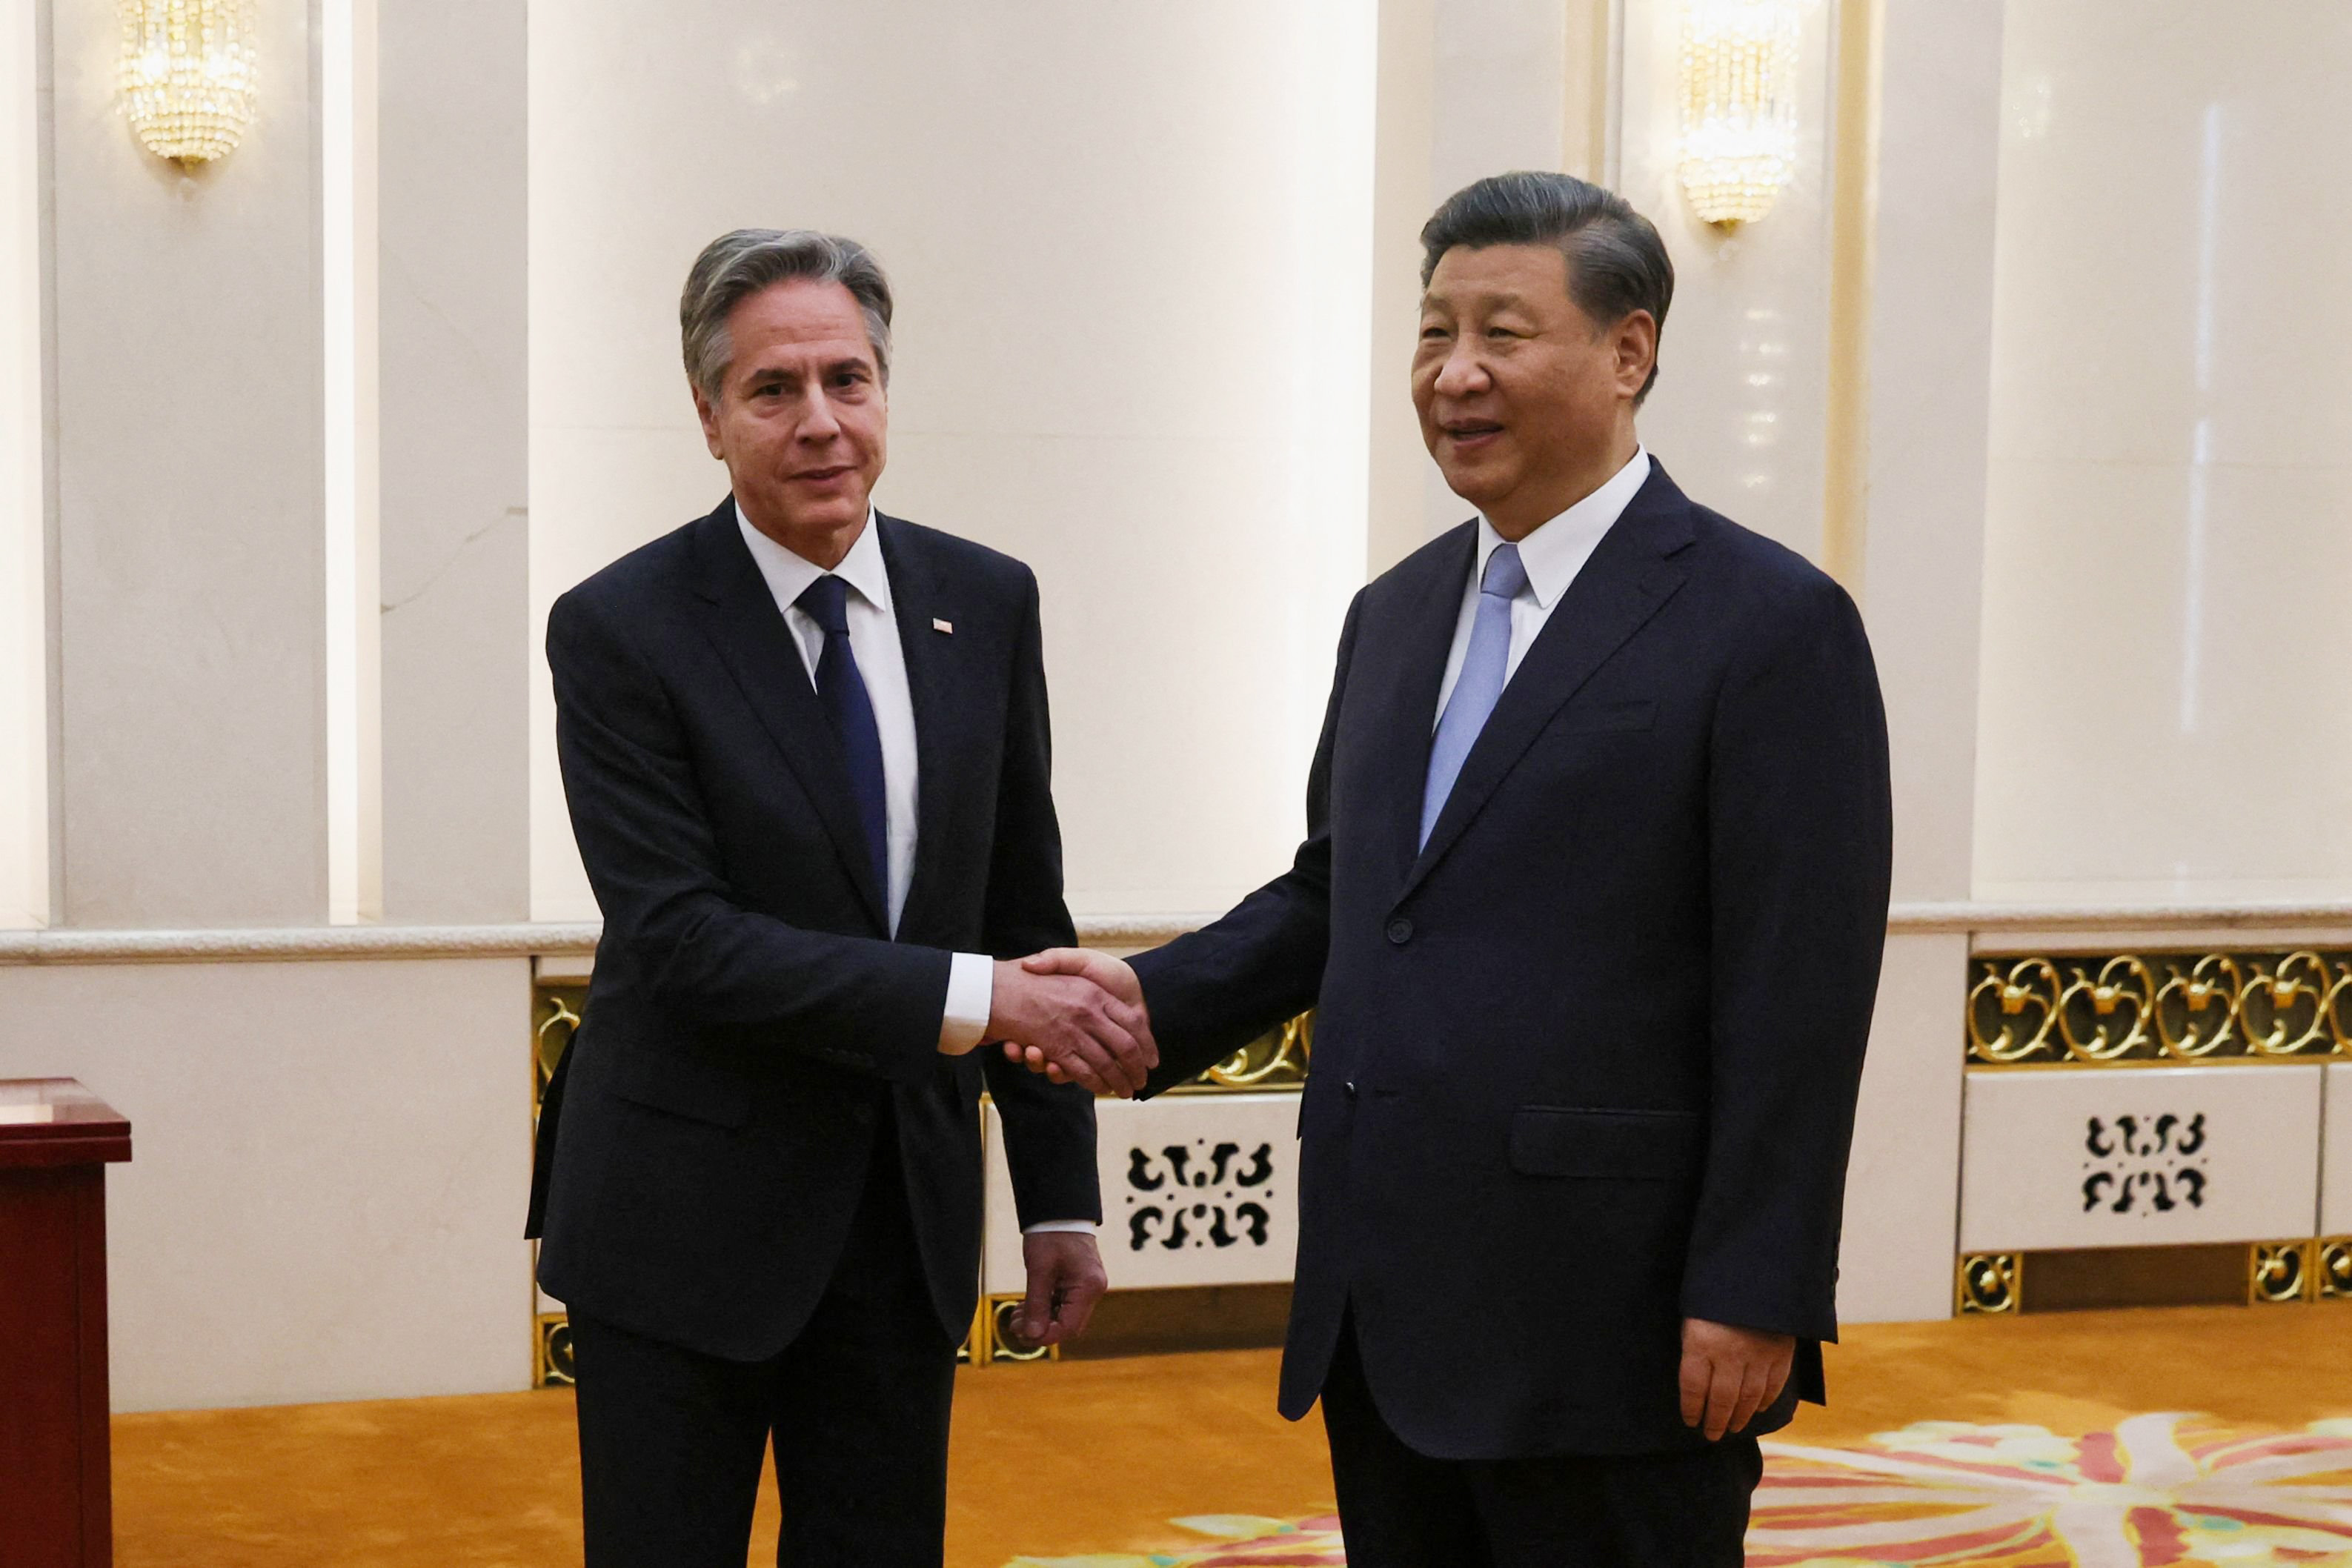 A welcome step: on the Blinken-Xi meet in China